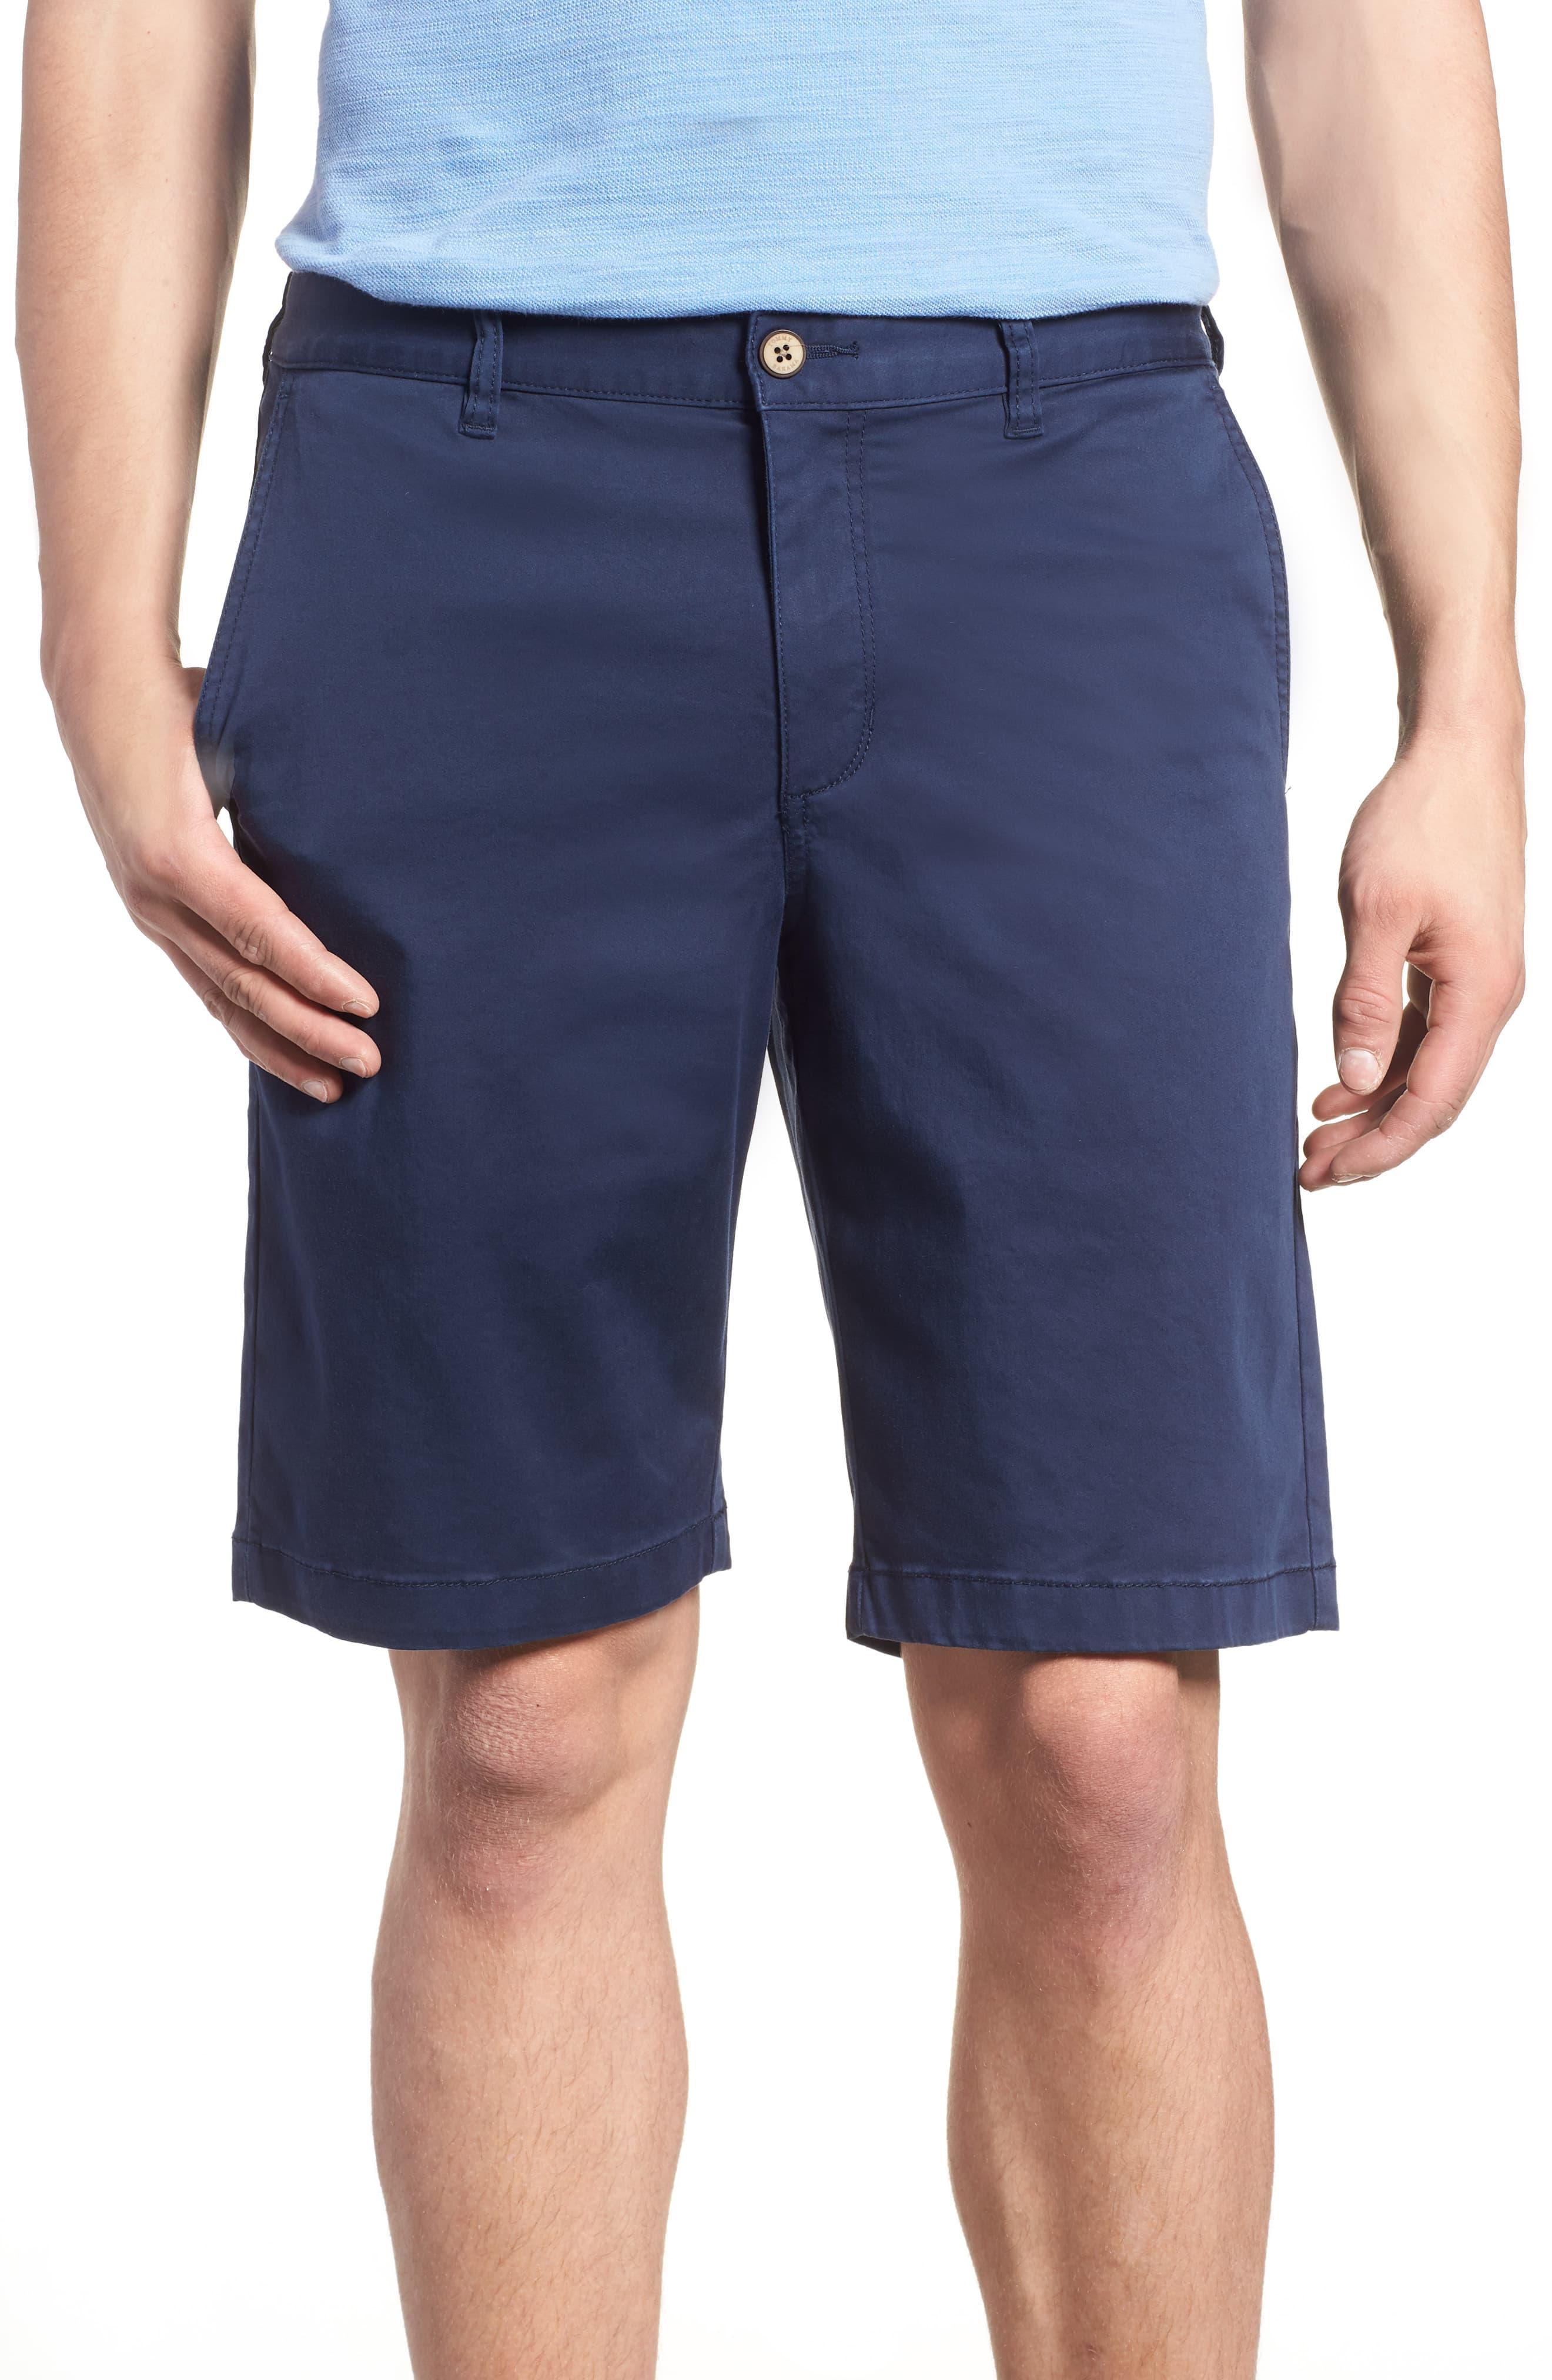 Tommy Bahama Boracay Chino Shorts in Blue for Men - Lyst